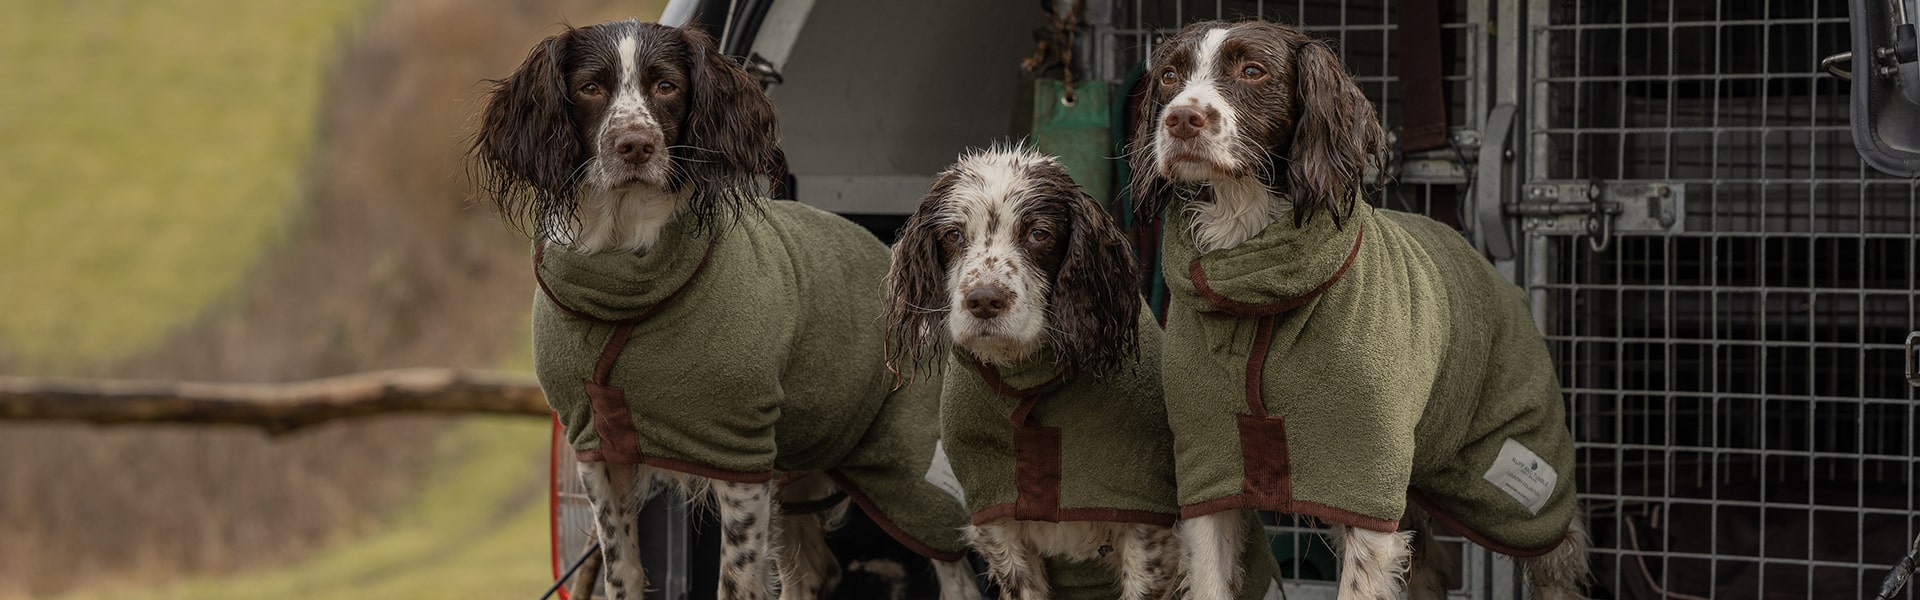 Three gundogs in the back of a 4x4